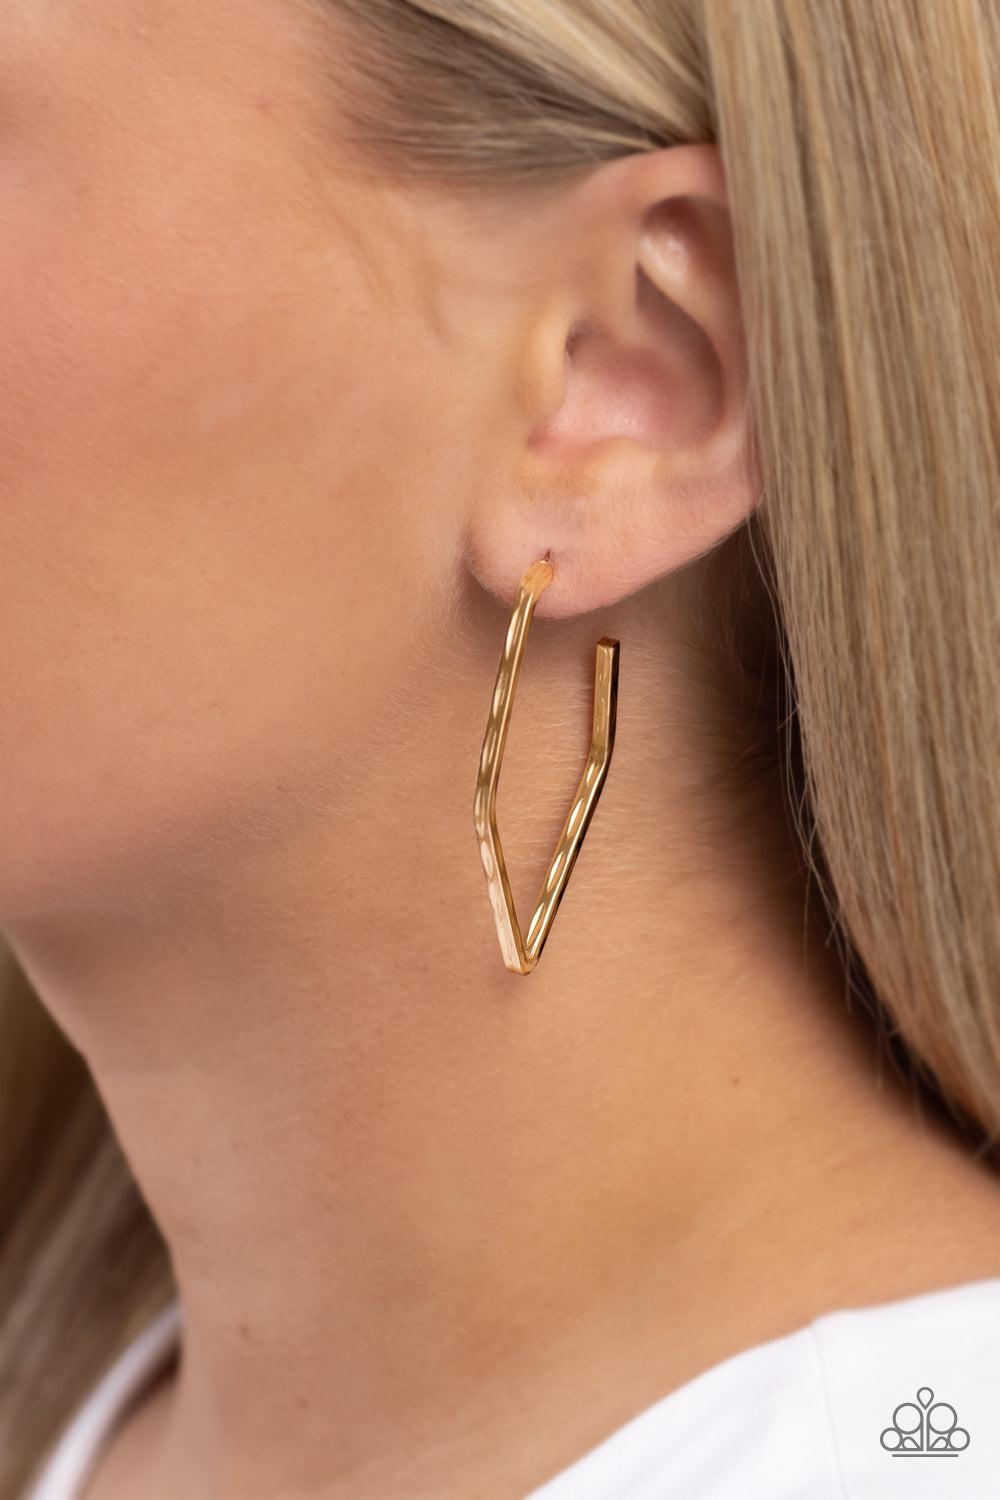 Winning Edge Gold Hoop Earrings - Paparazzi Accessories-on model - CarasShop.com - $5 Jewelry by Cara Jewels